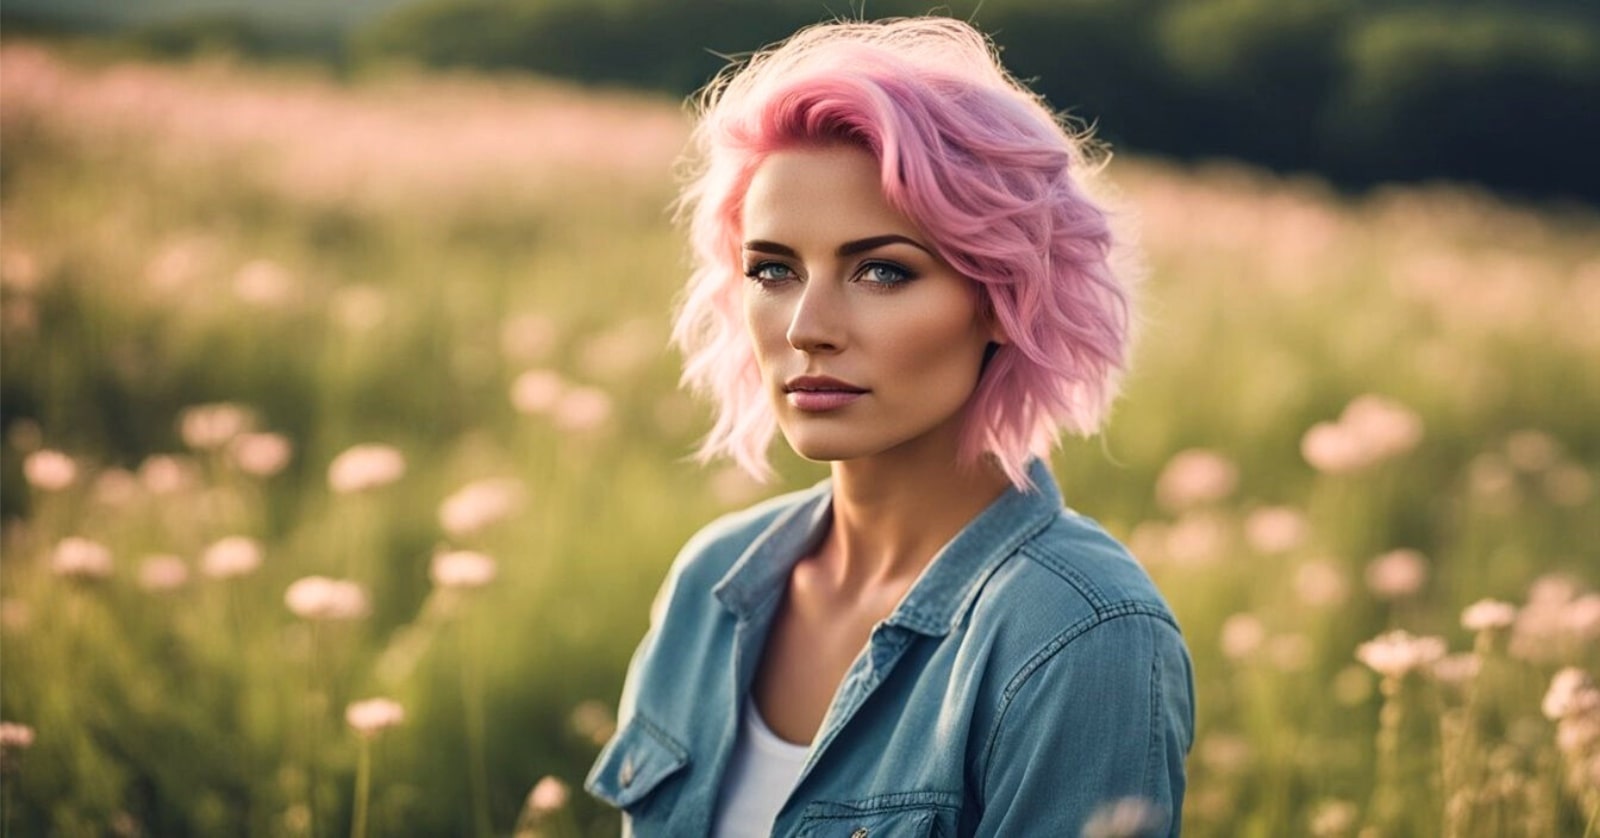 young woman with pink hair wearing a denim jacket with a flower meadow in the background. She has a pensive expression on her face.